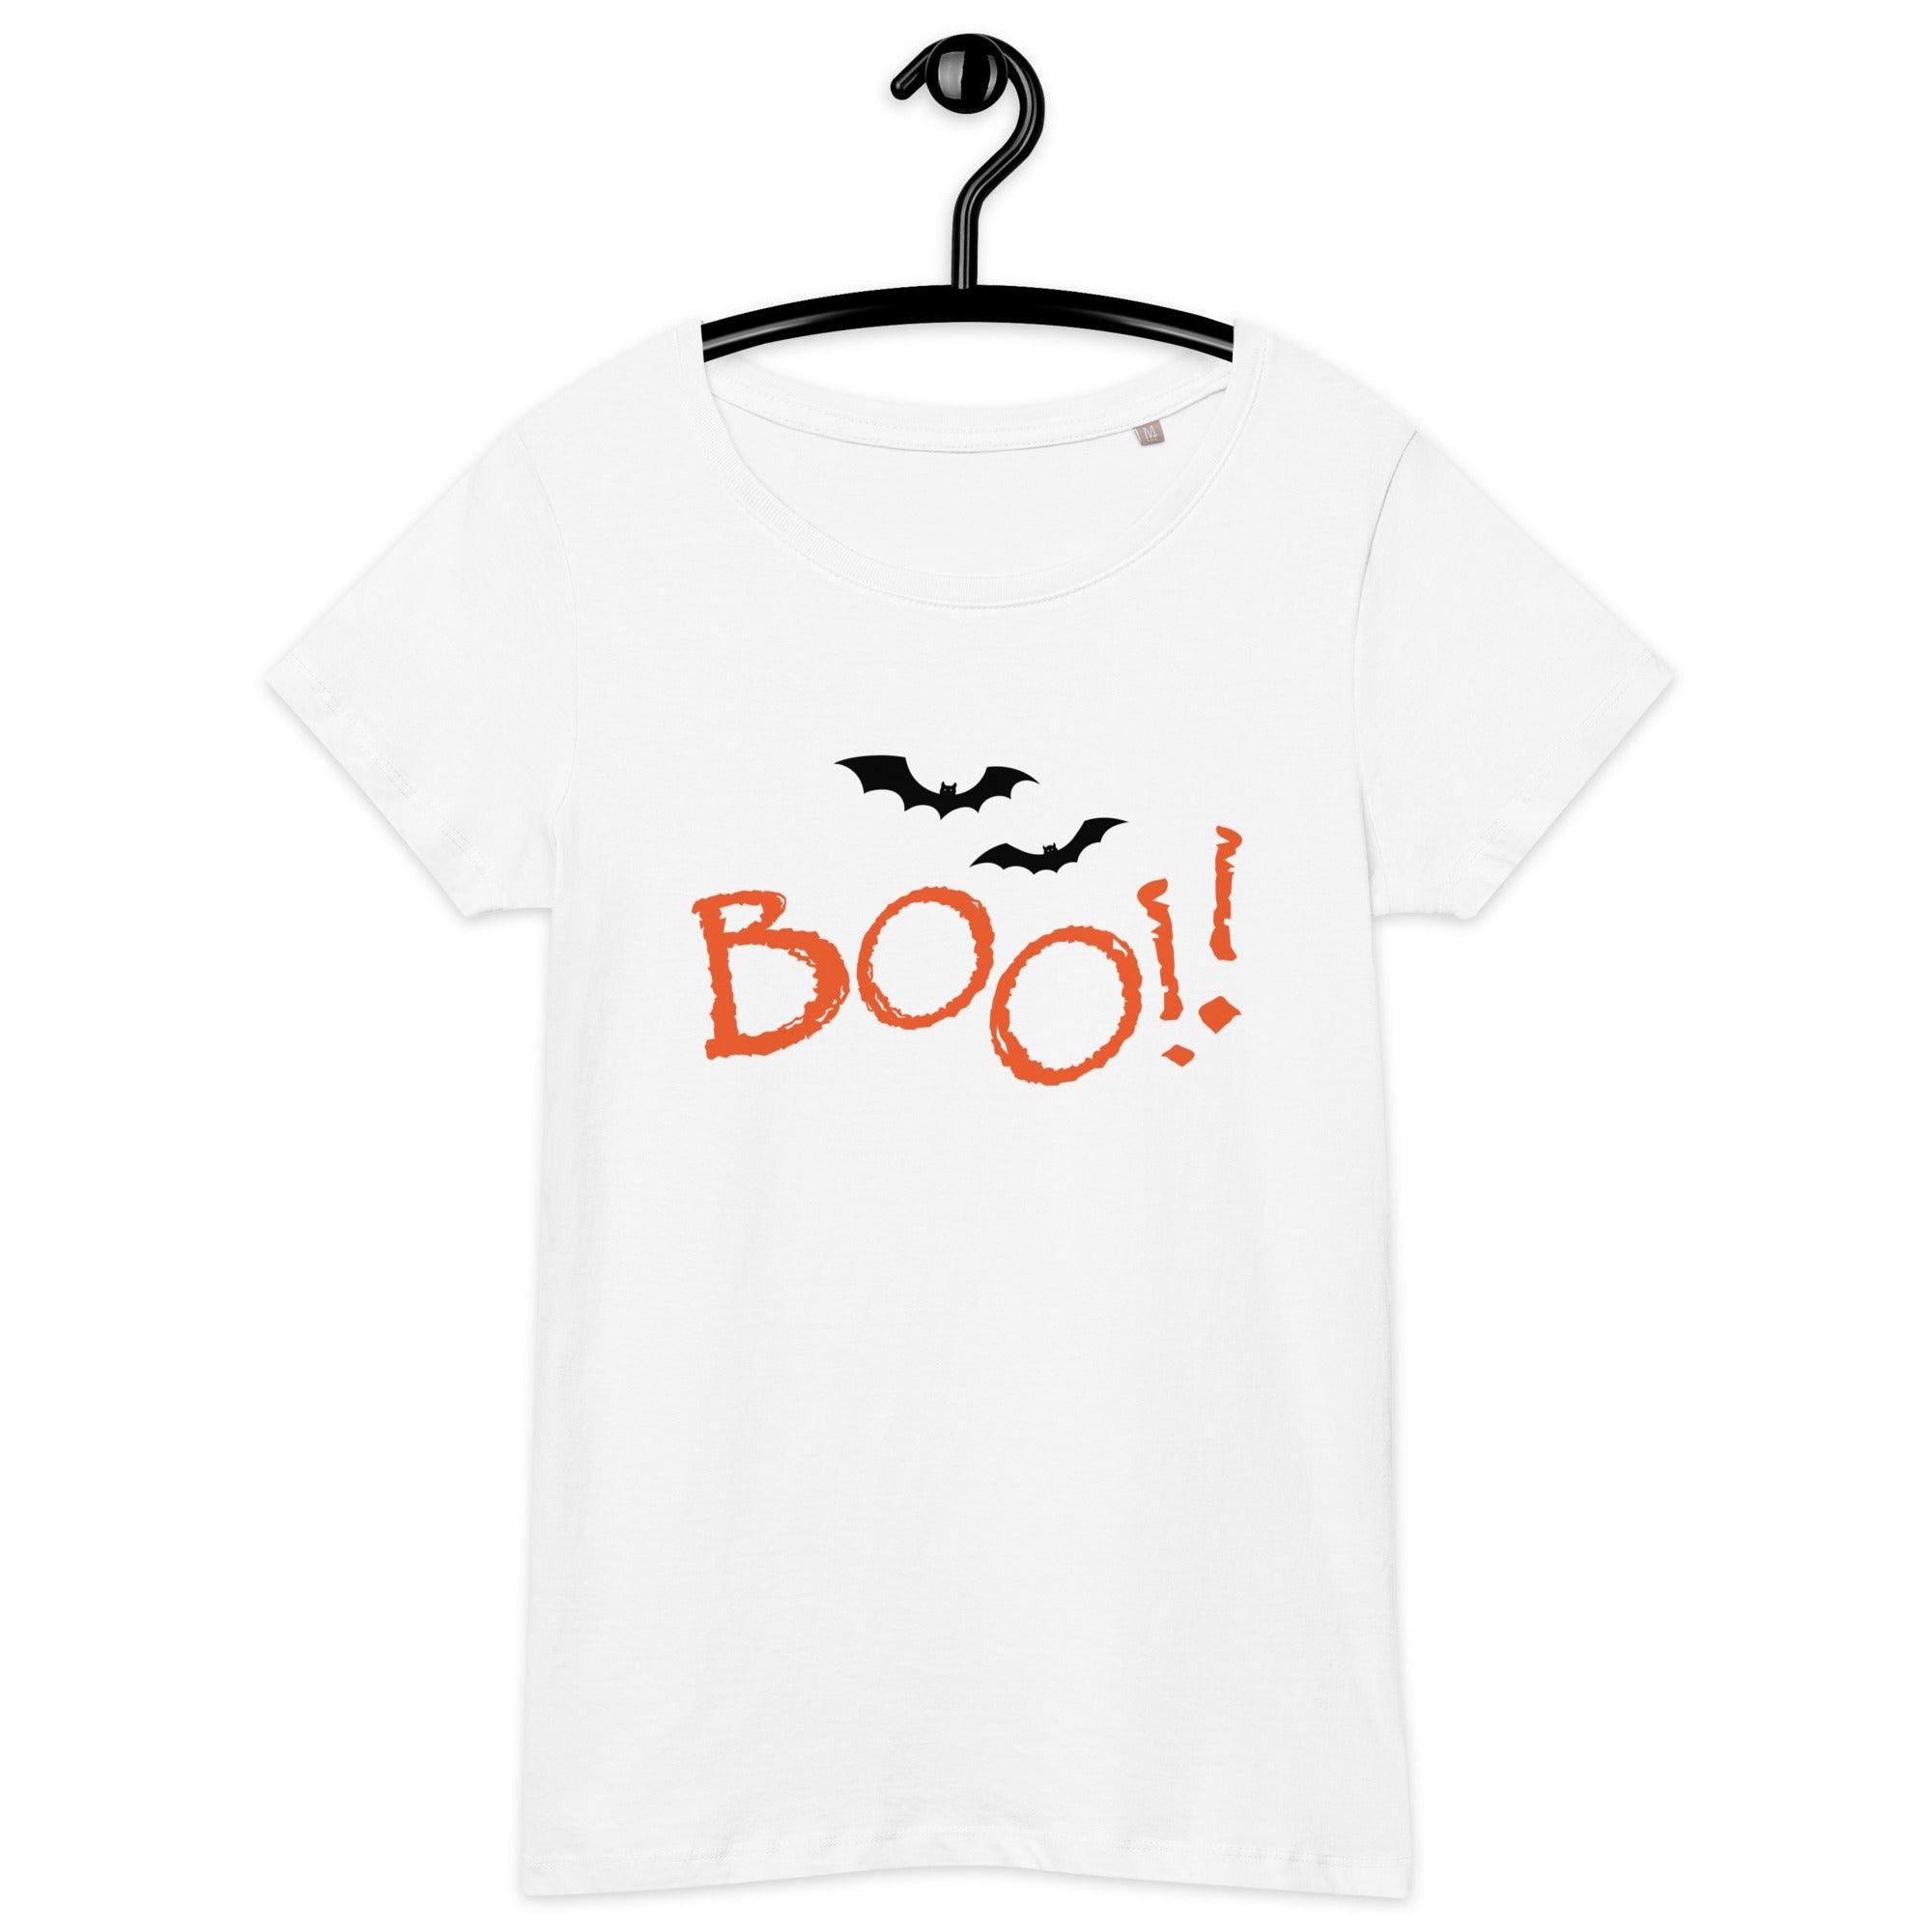 Laid-out Organic Halloween T-Shirt, showing off the spooky yet stylish print on sustainable fabric for a guilt-free celebration.